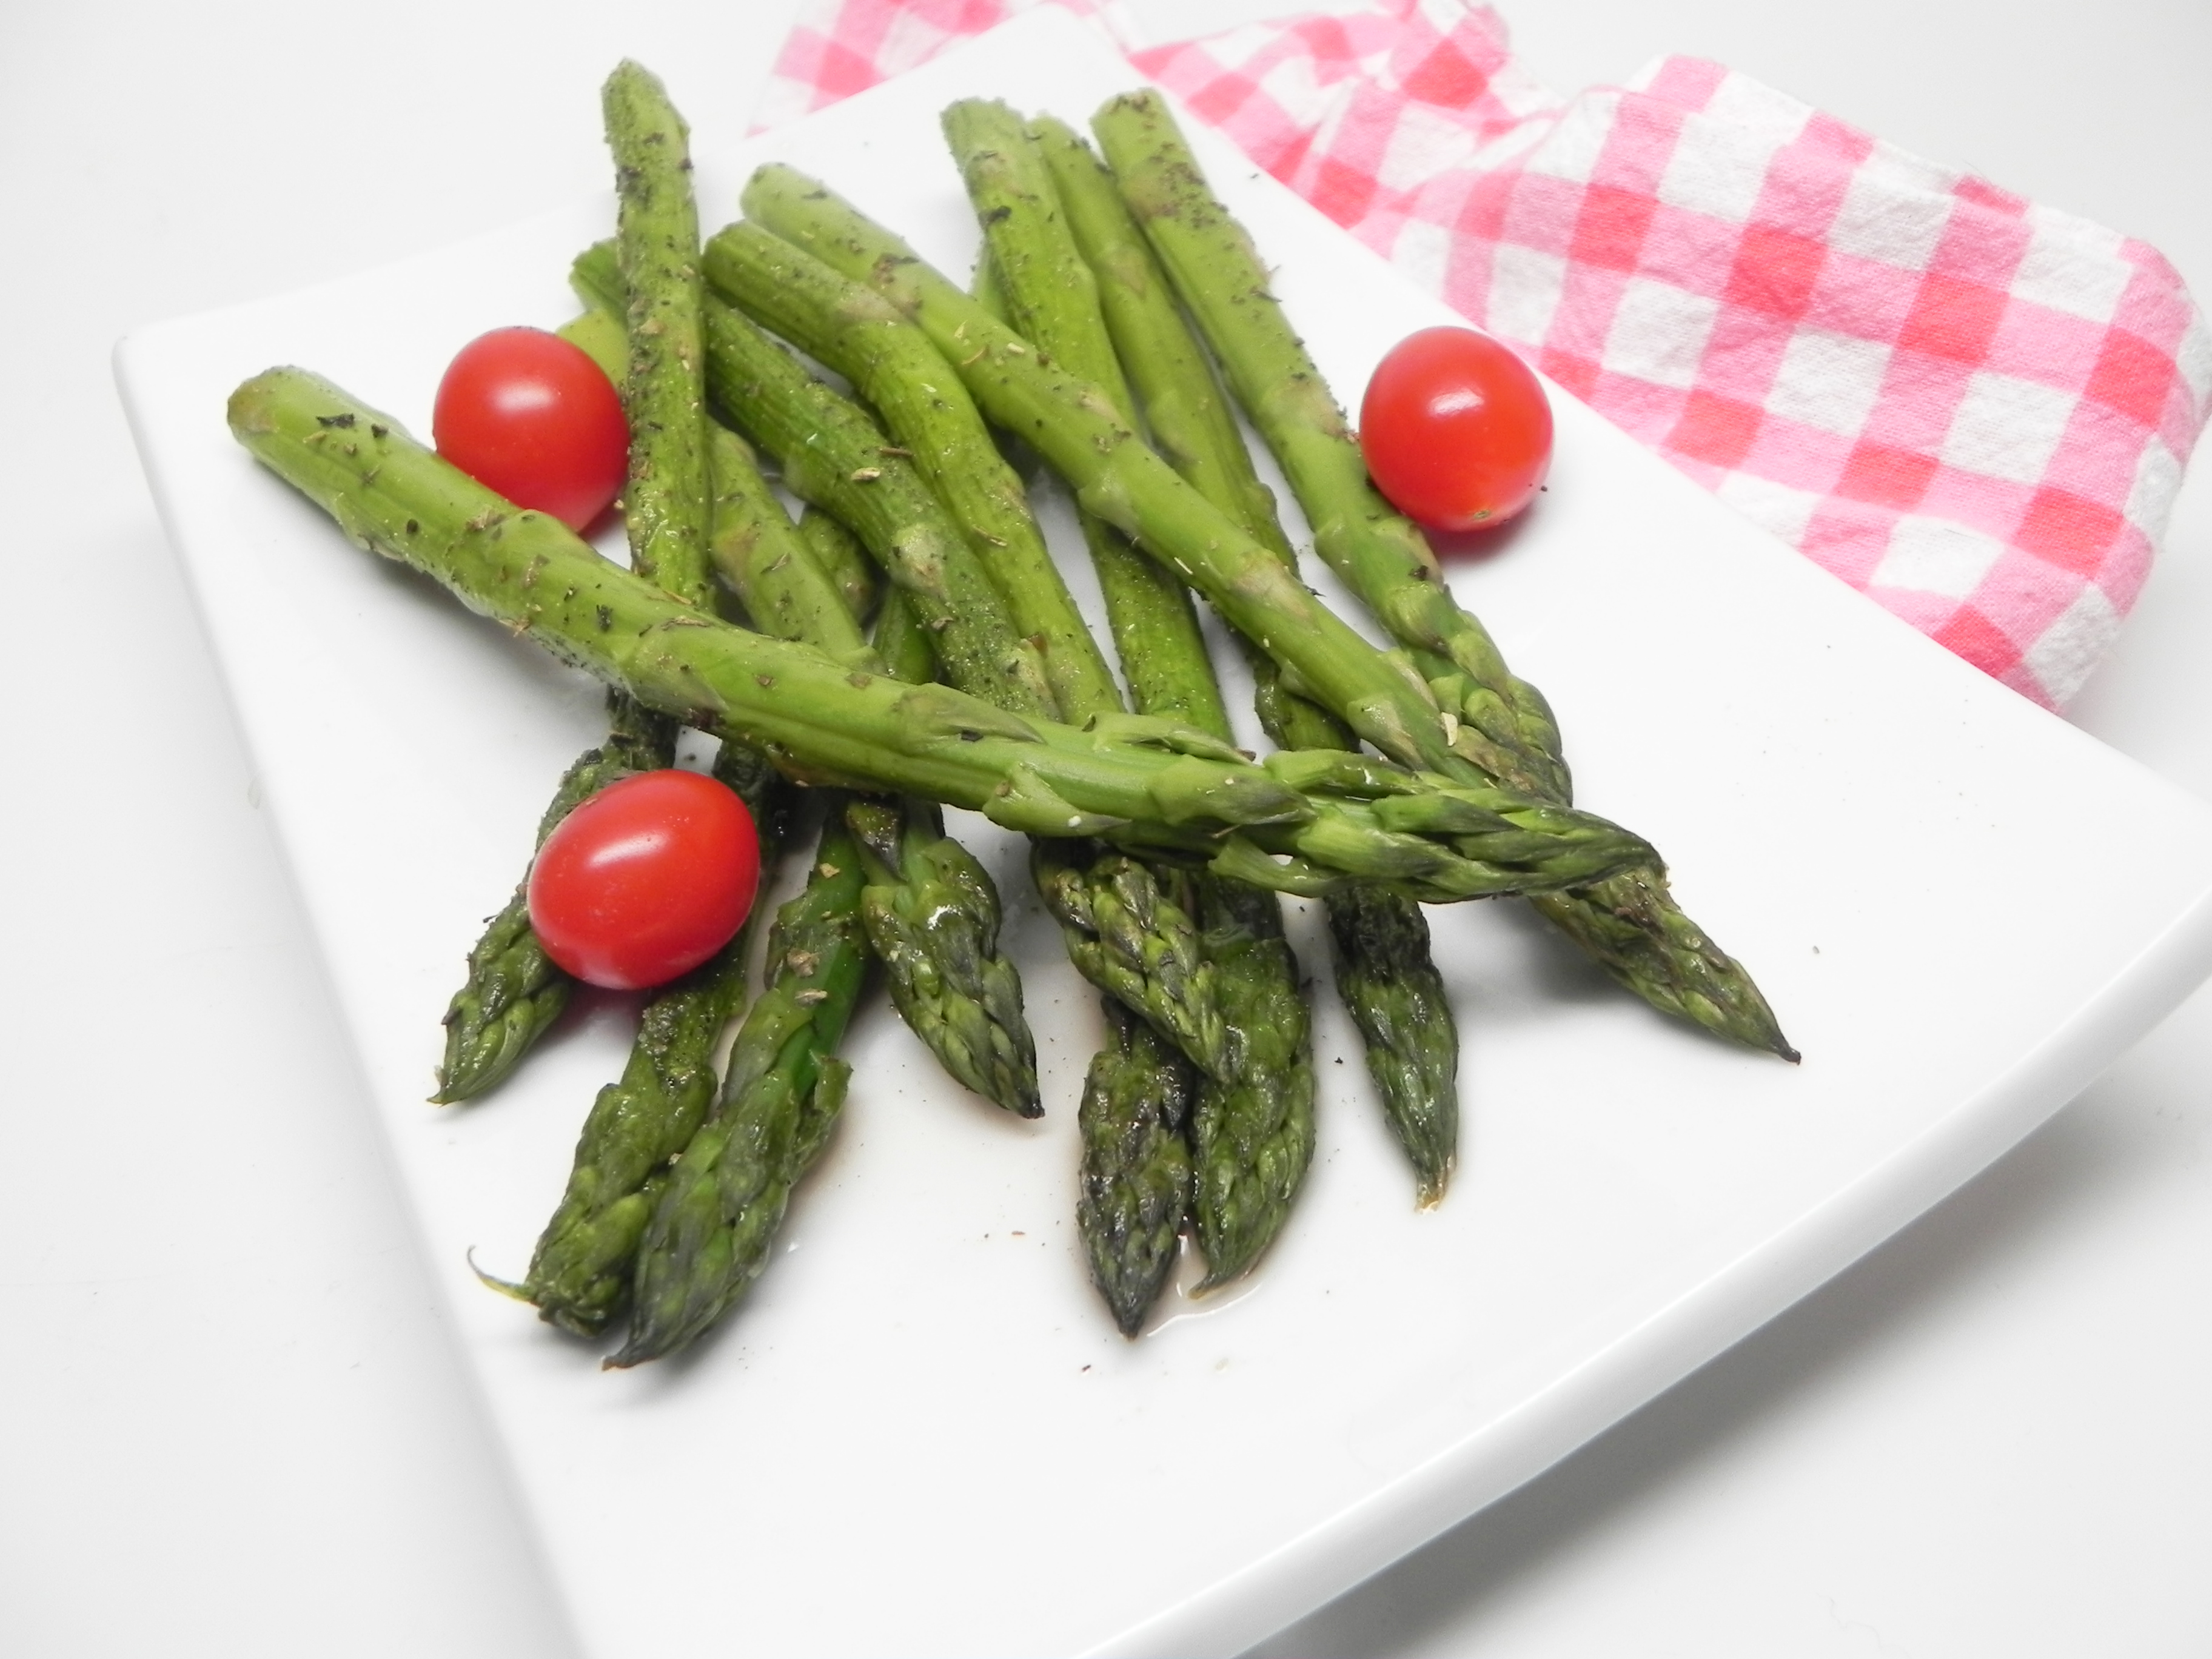 Baked Asparagus with Red Wine Vinegar